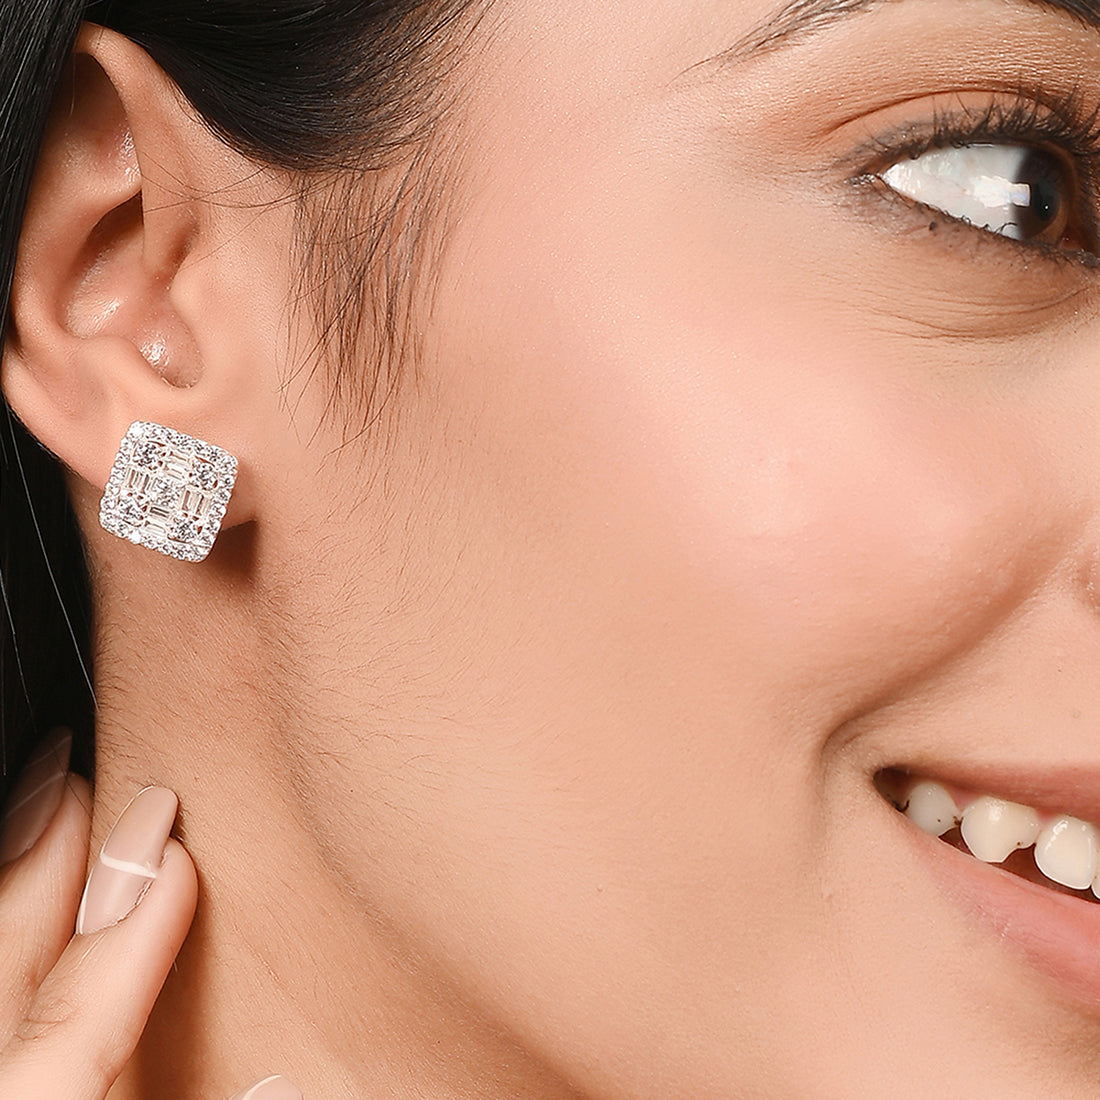 Square Shaped Stud Earrings Decked With CZ